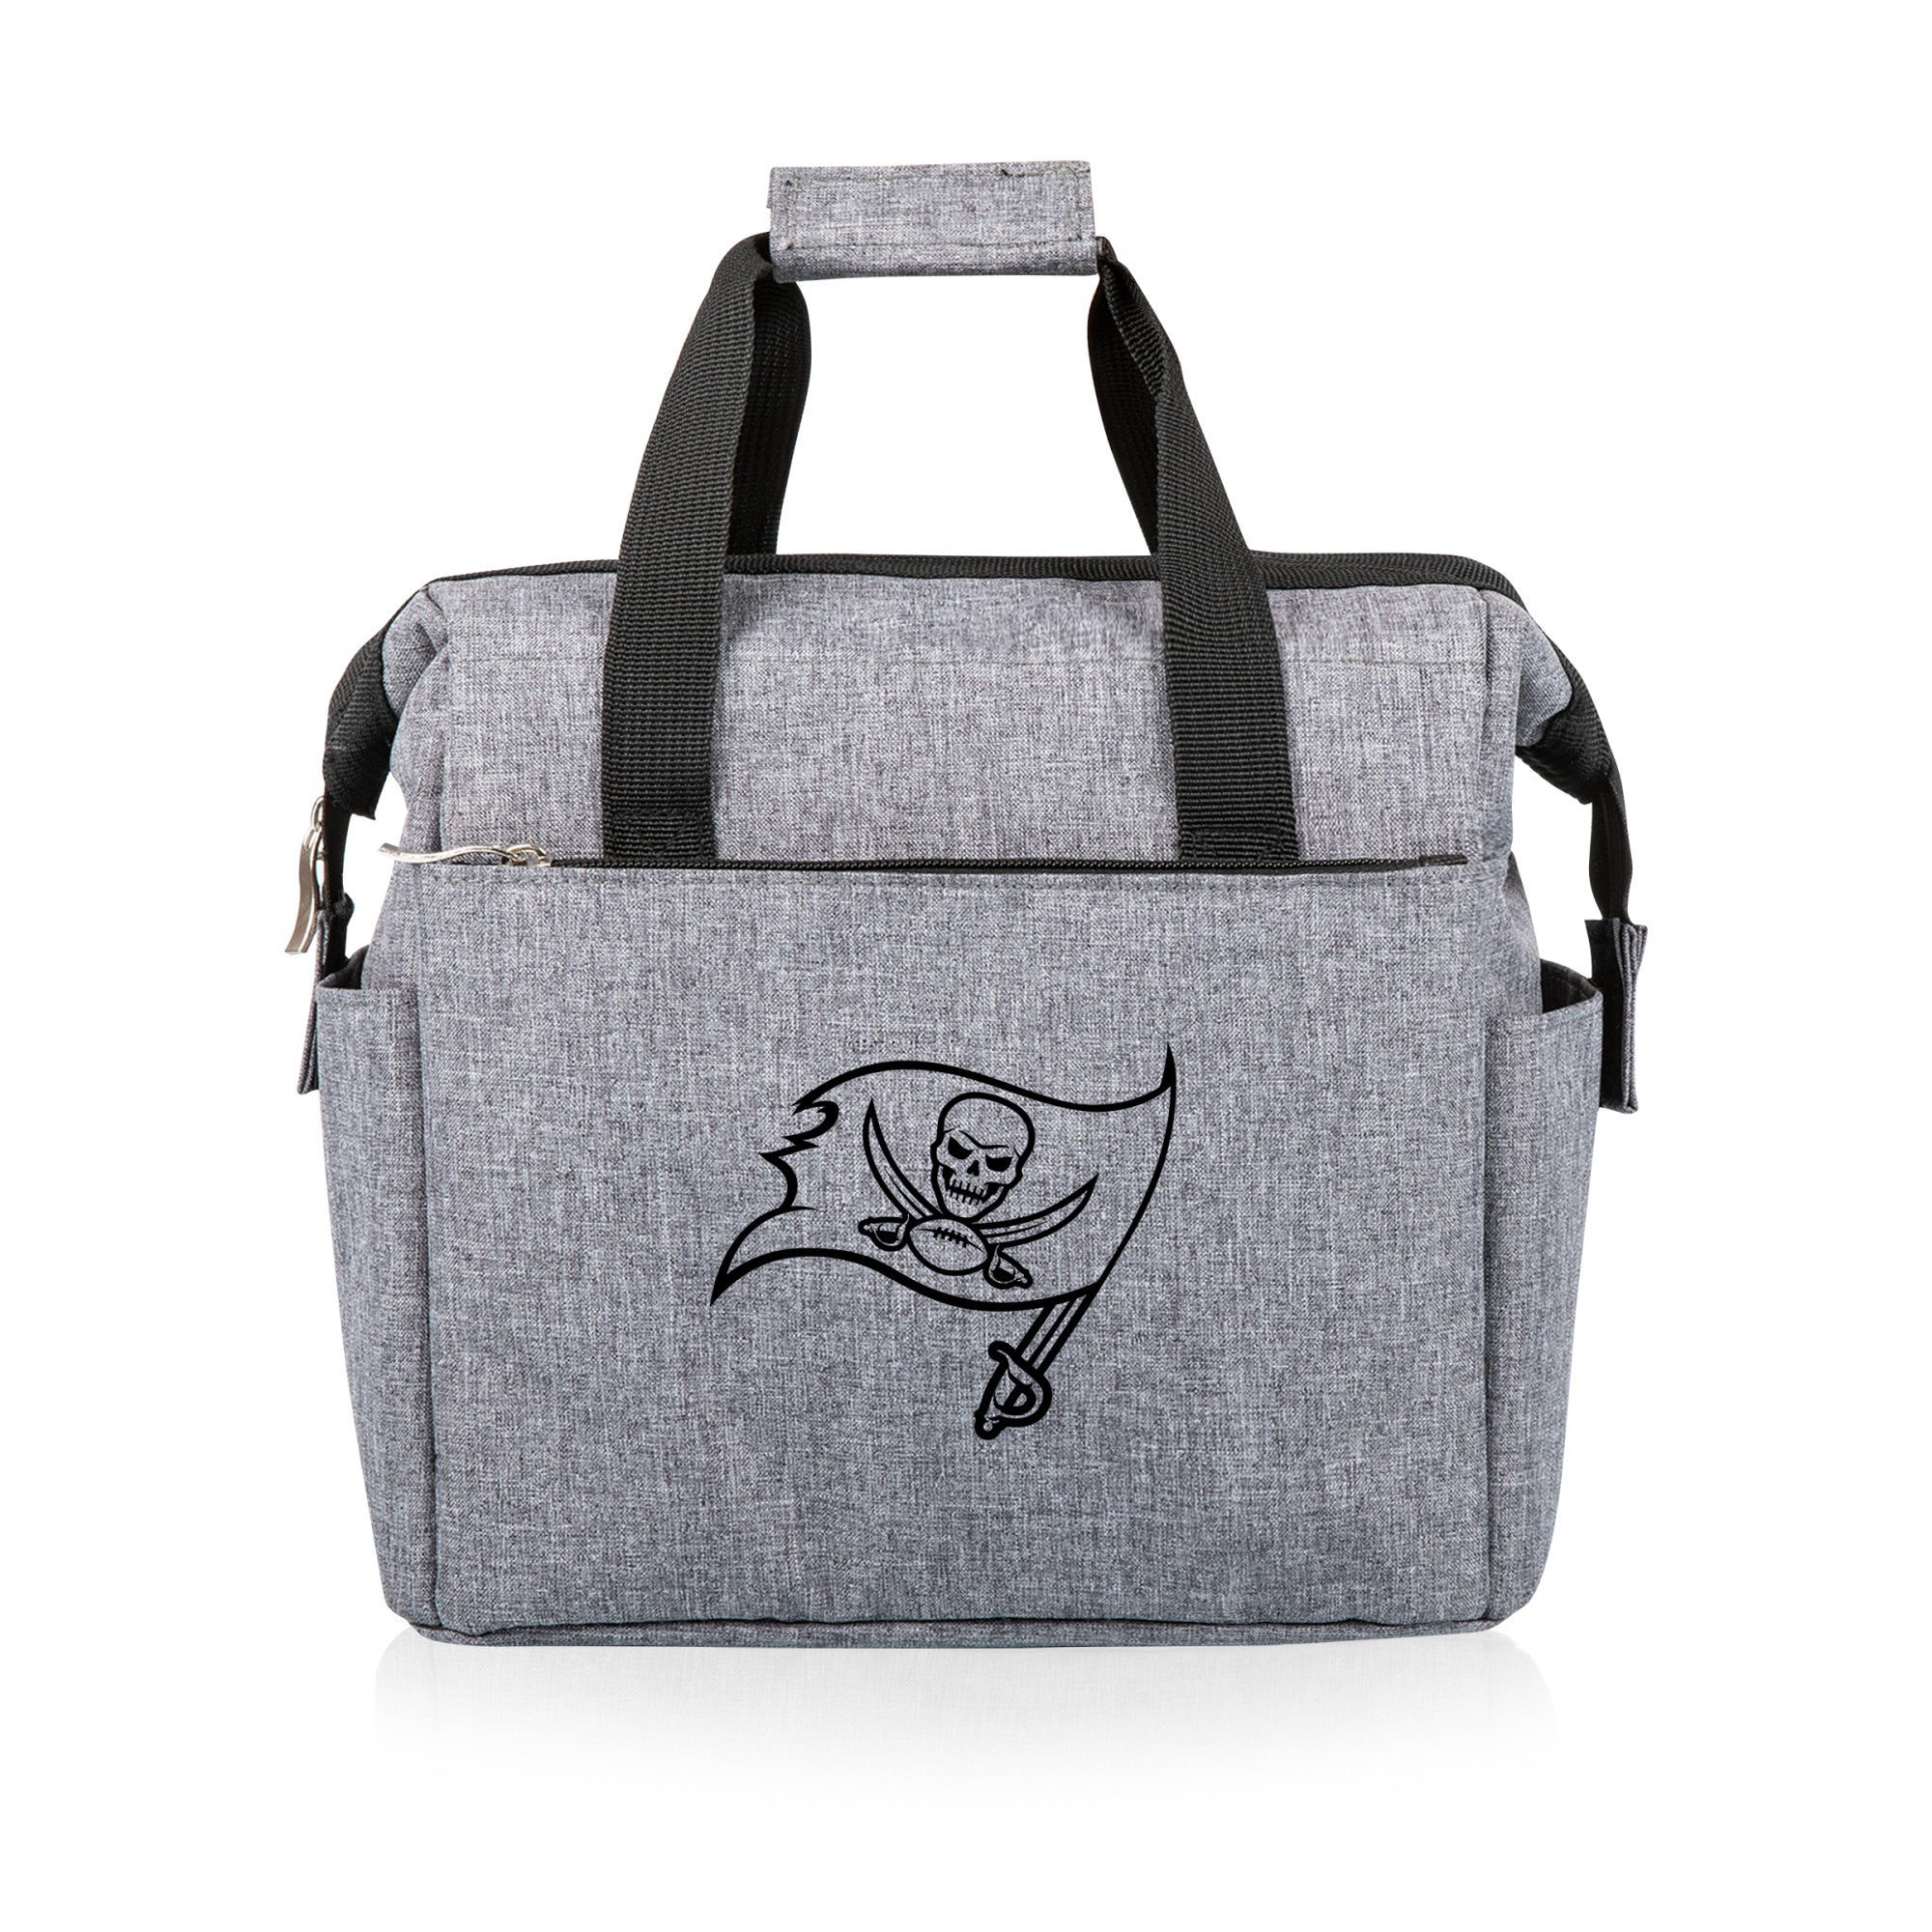 Tampa Bay Buccaneers - On The Go Lunch Bag Cooler